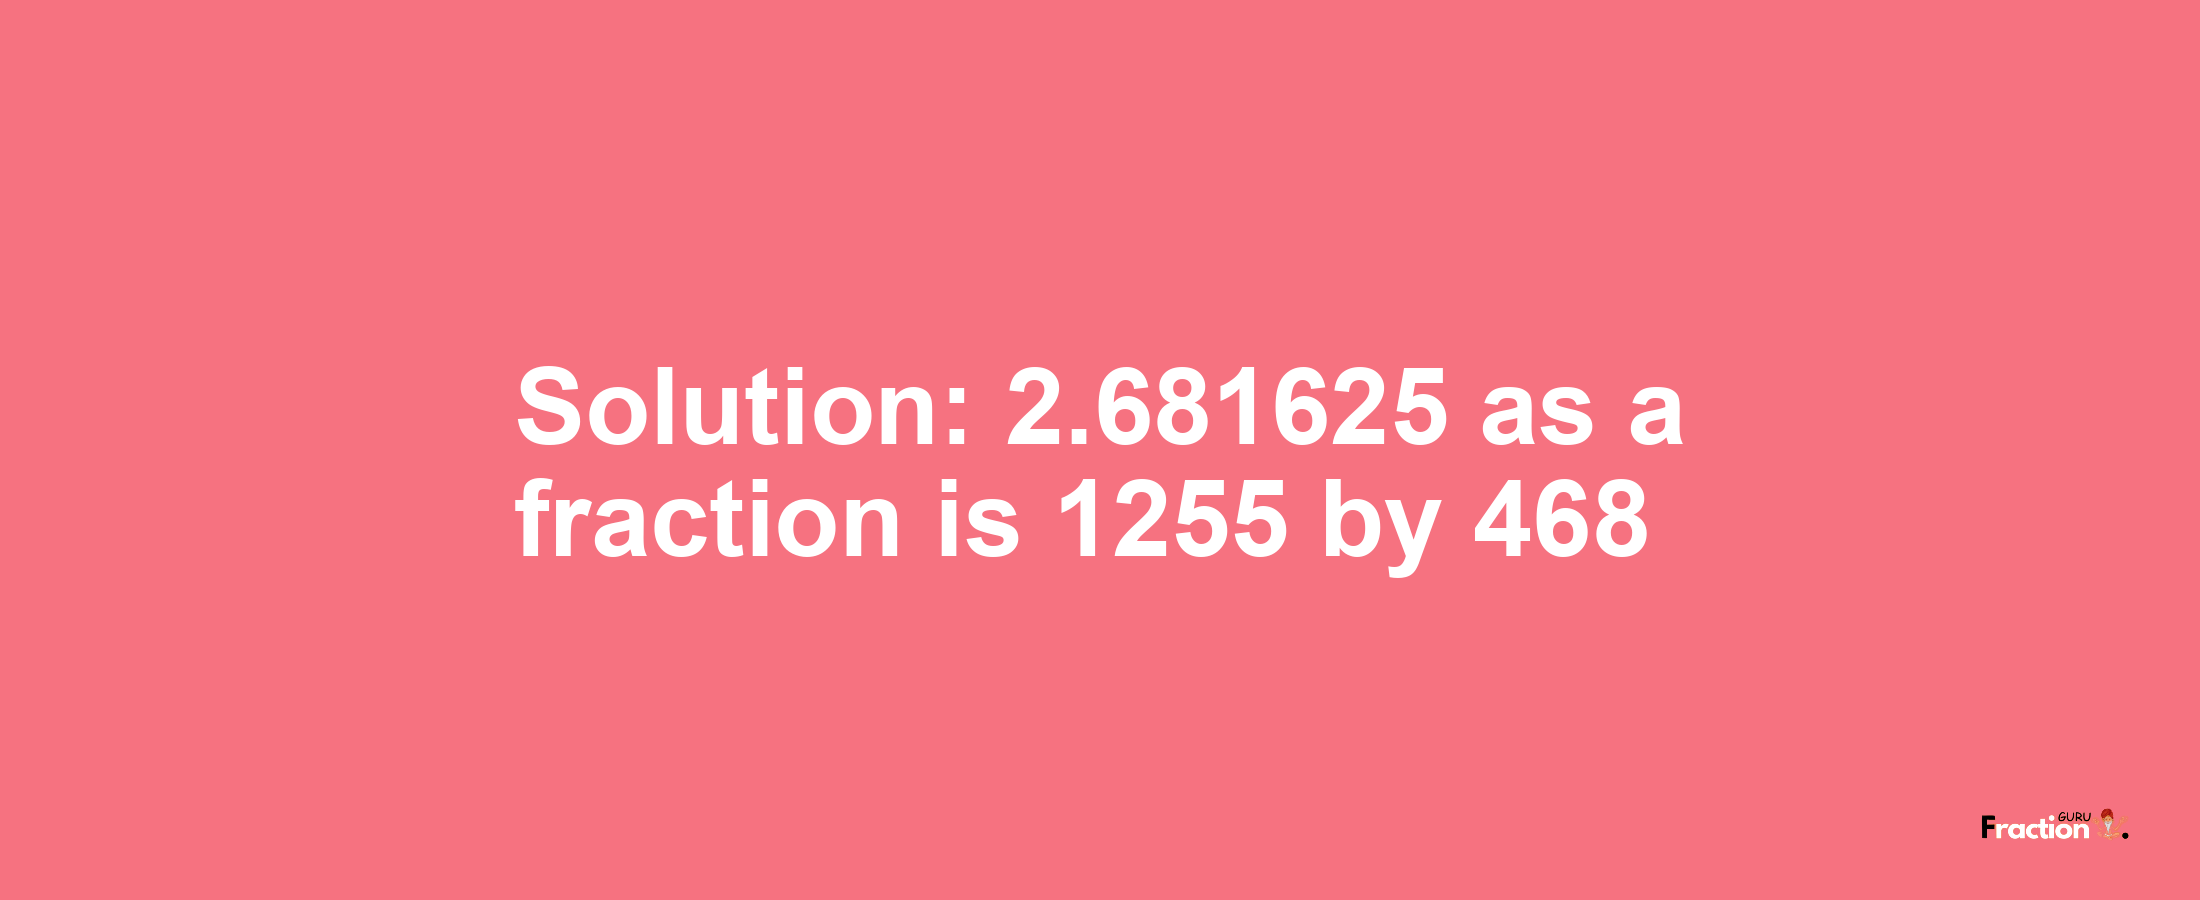 Solution:2.681625 as a fraction is 1255/468